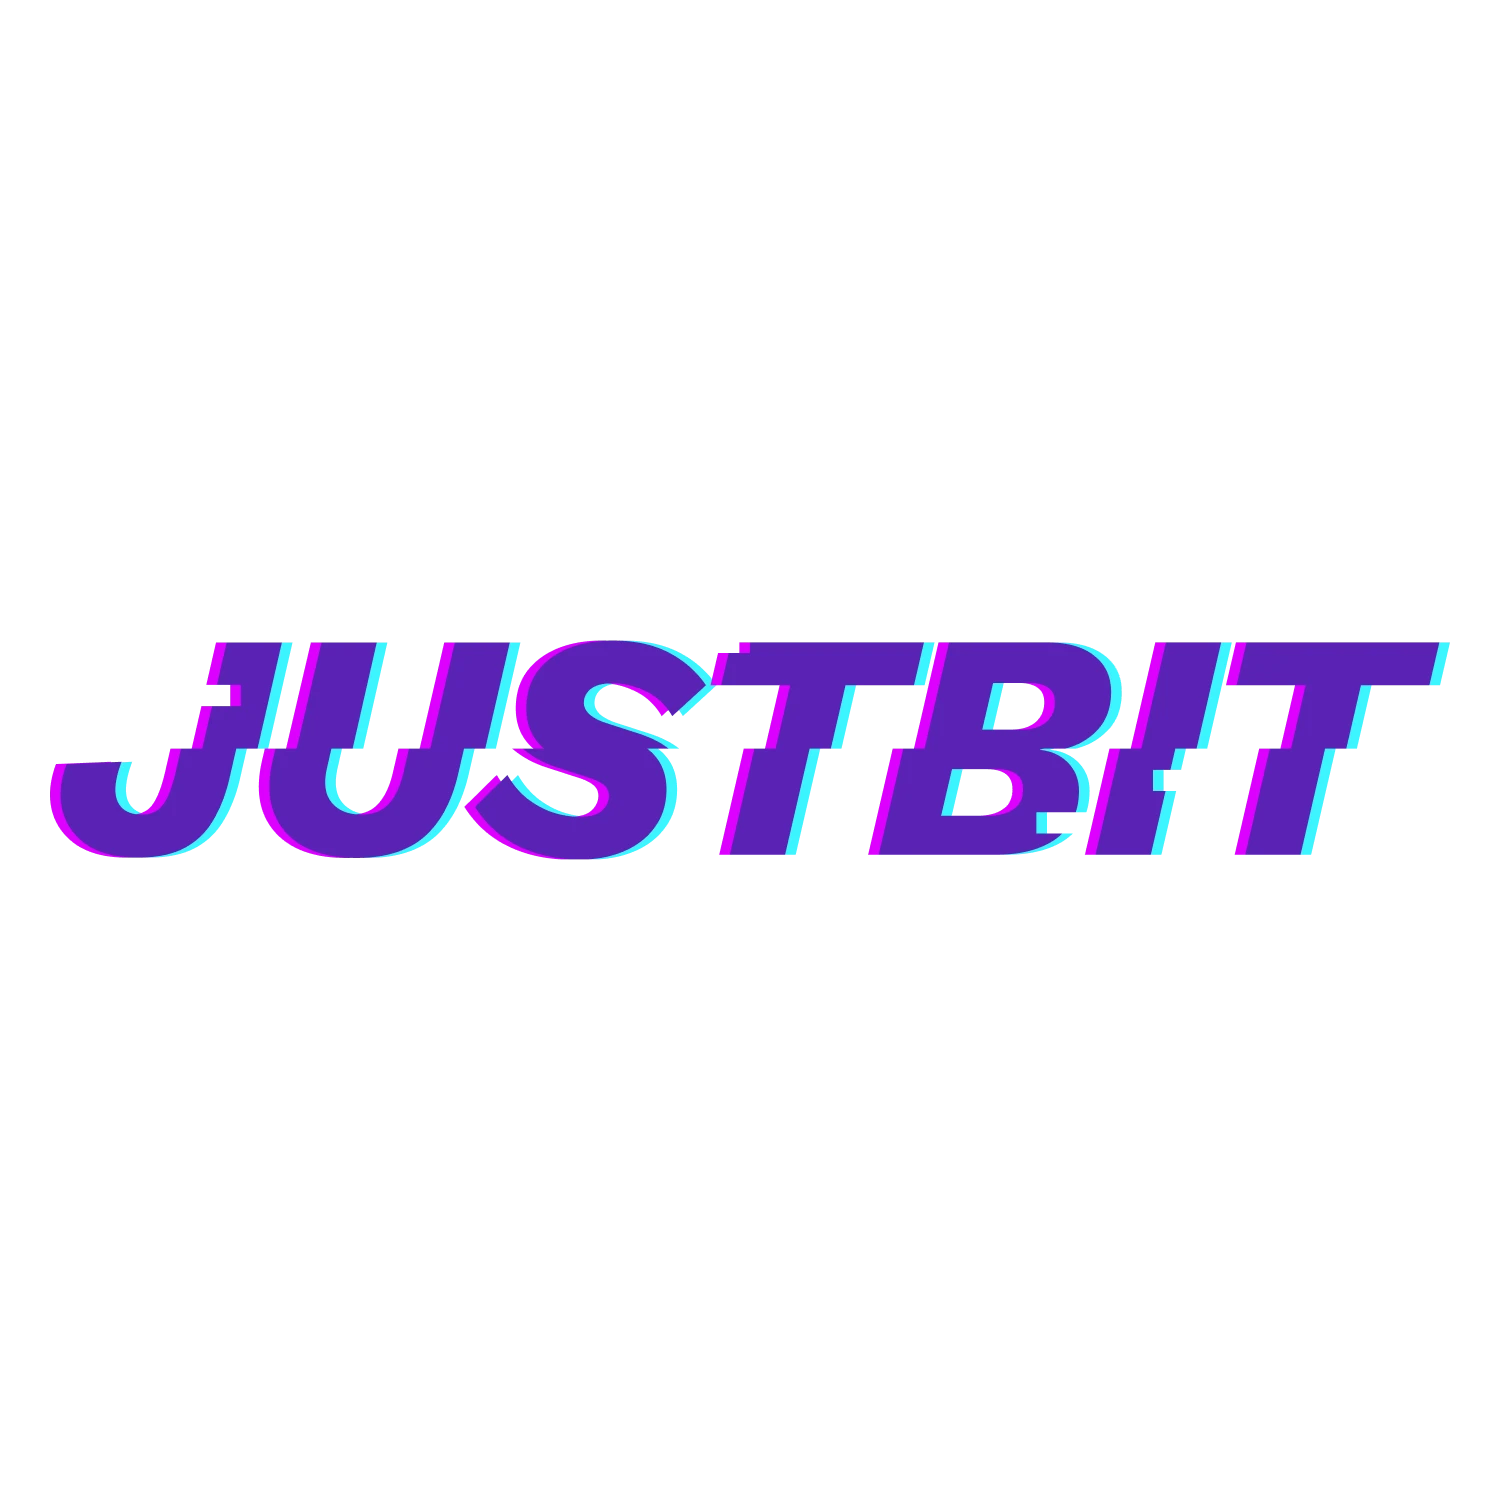 Try playing in a casino for cryptocurrency on JustBit.